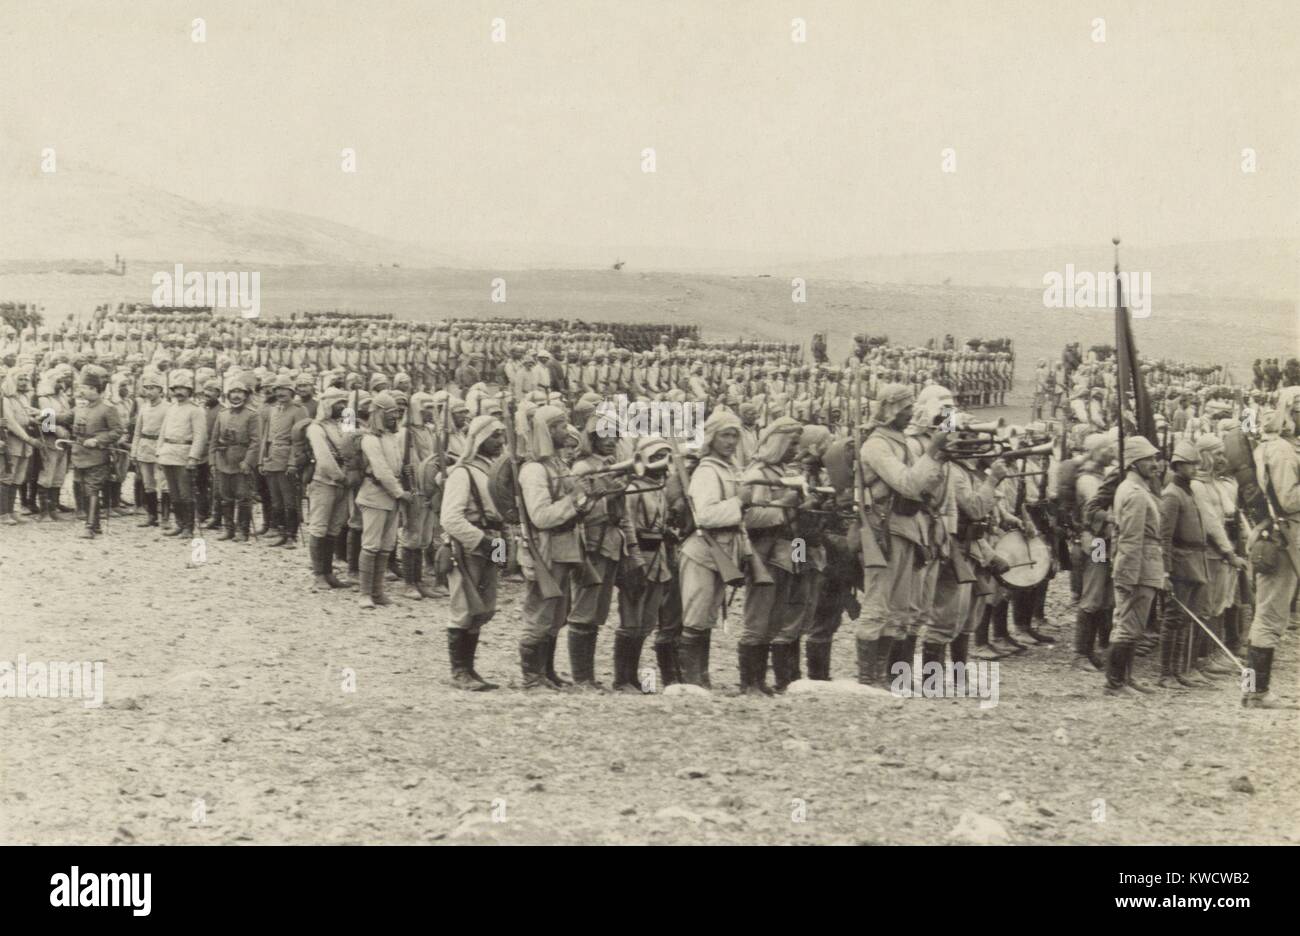 World War 1 in the Middle East. Turkish and Arab troops, the Suez Expeditionary Force of 25,000, muster on the Plain of Esdraelon. The Ottoman Fourth Army, commanded by General Ahmed Cemal (Far Left, with cane), engaged British Empire troops at Suez on Feb. 2-3, 1915,and suffered 2,000 casualties (to the British 150) before they retreated back to Beersheba, Palestine. (BSLOC_2013_1_53) Stock Photo